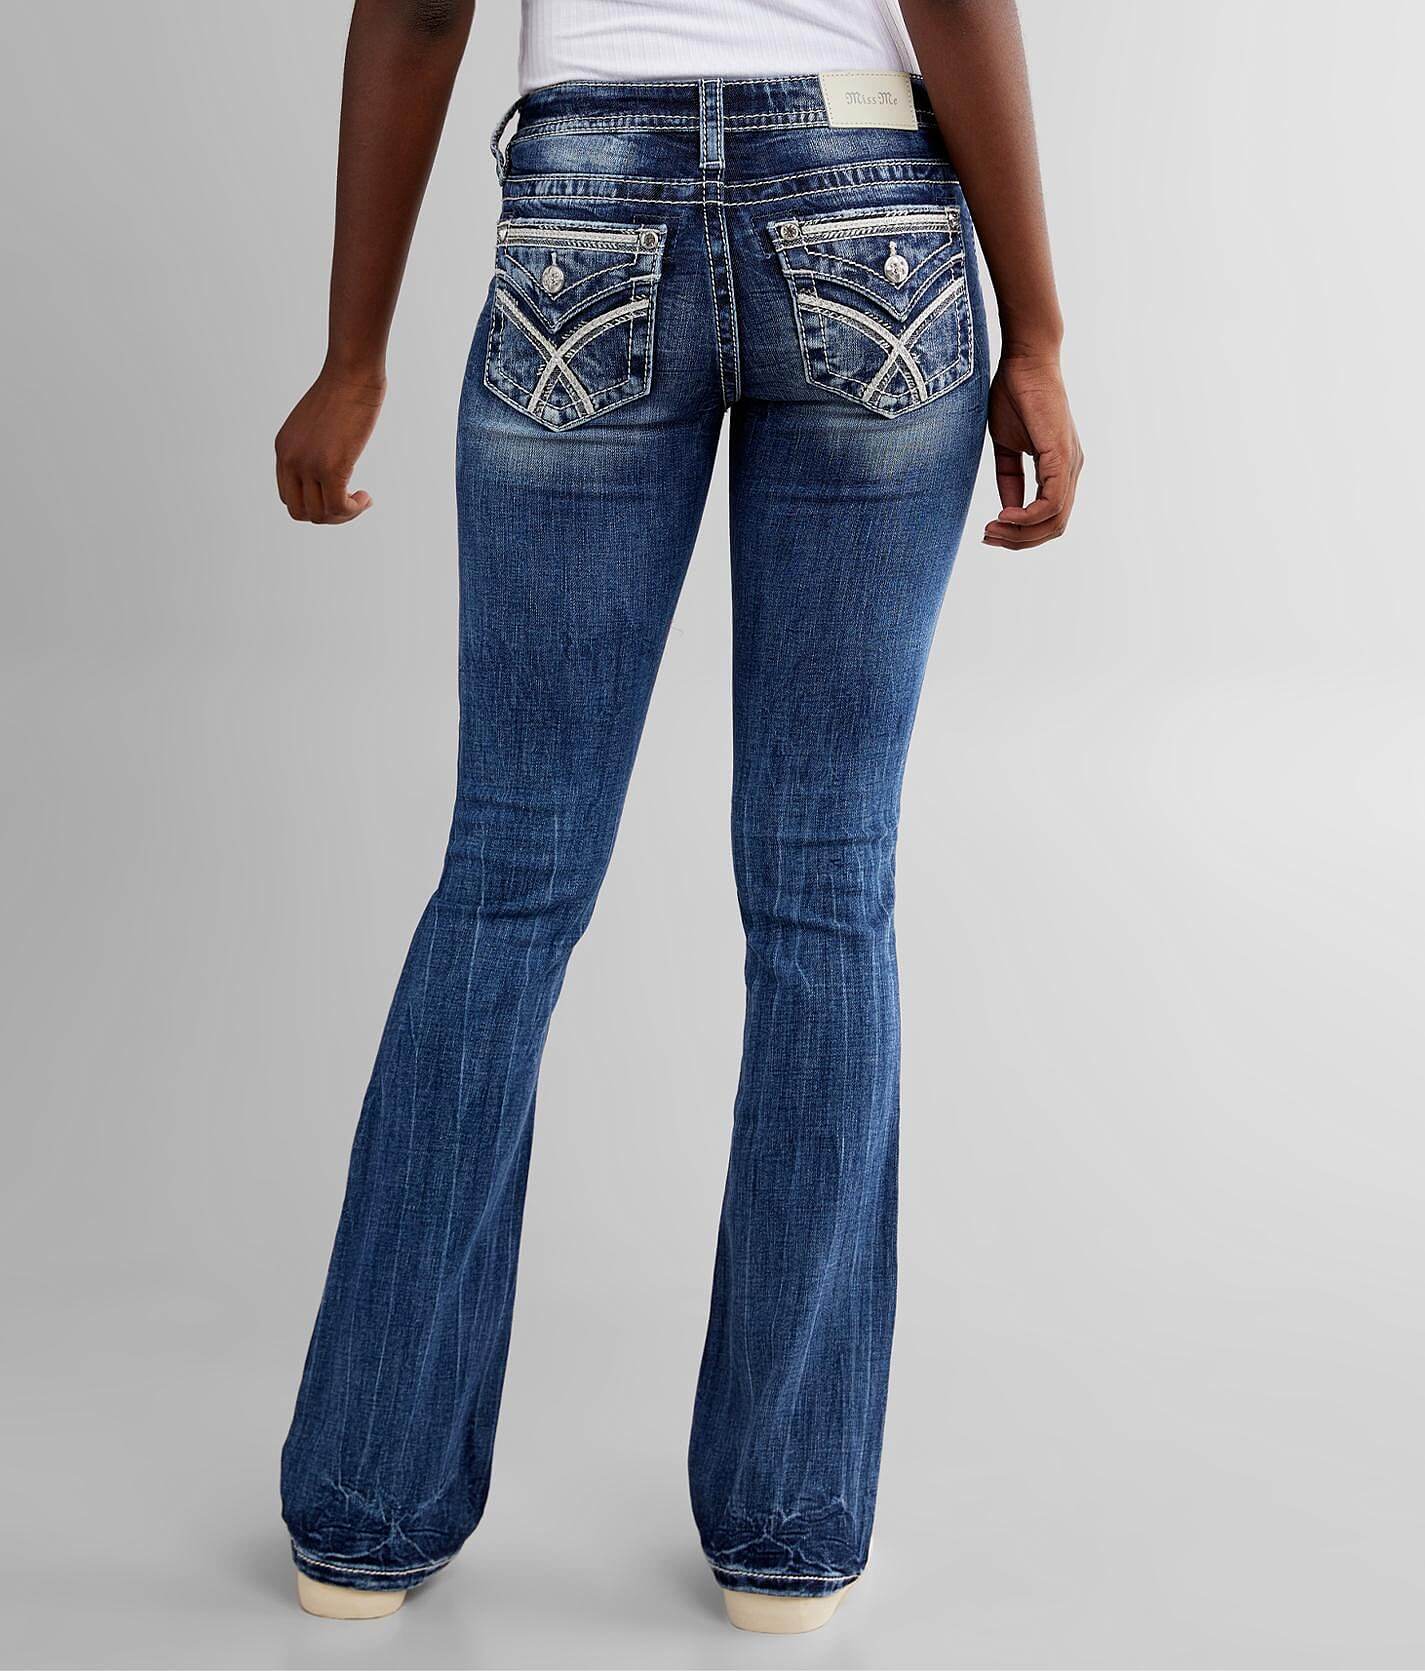 buckle low rise jeans